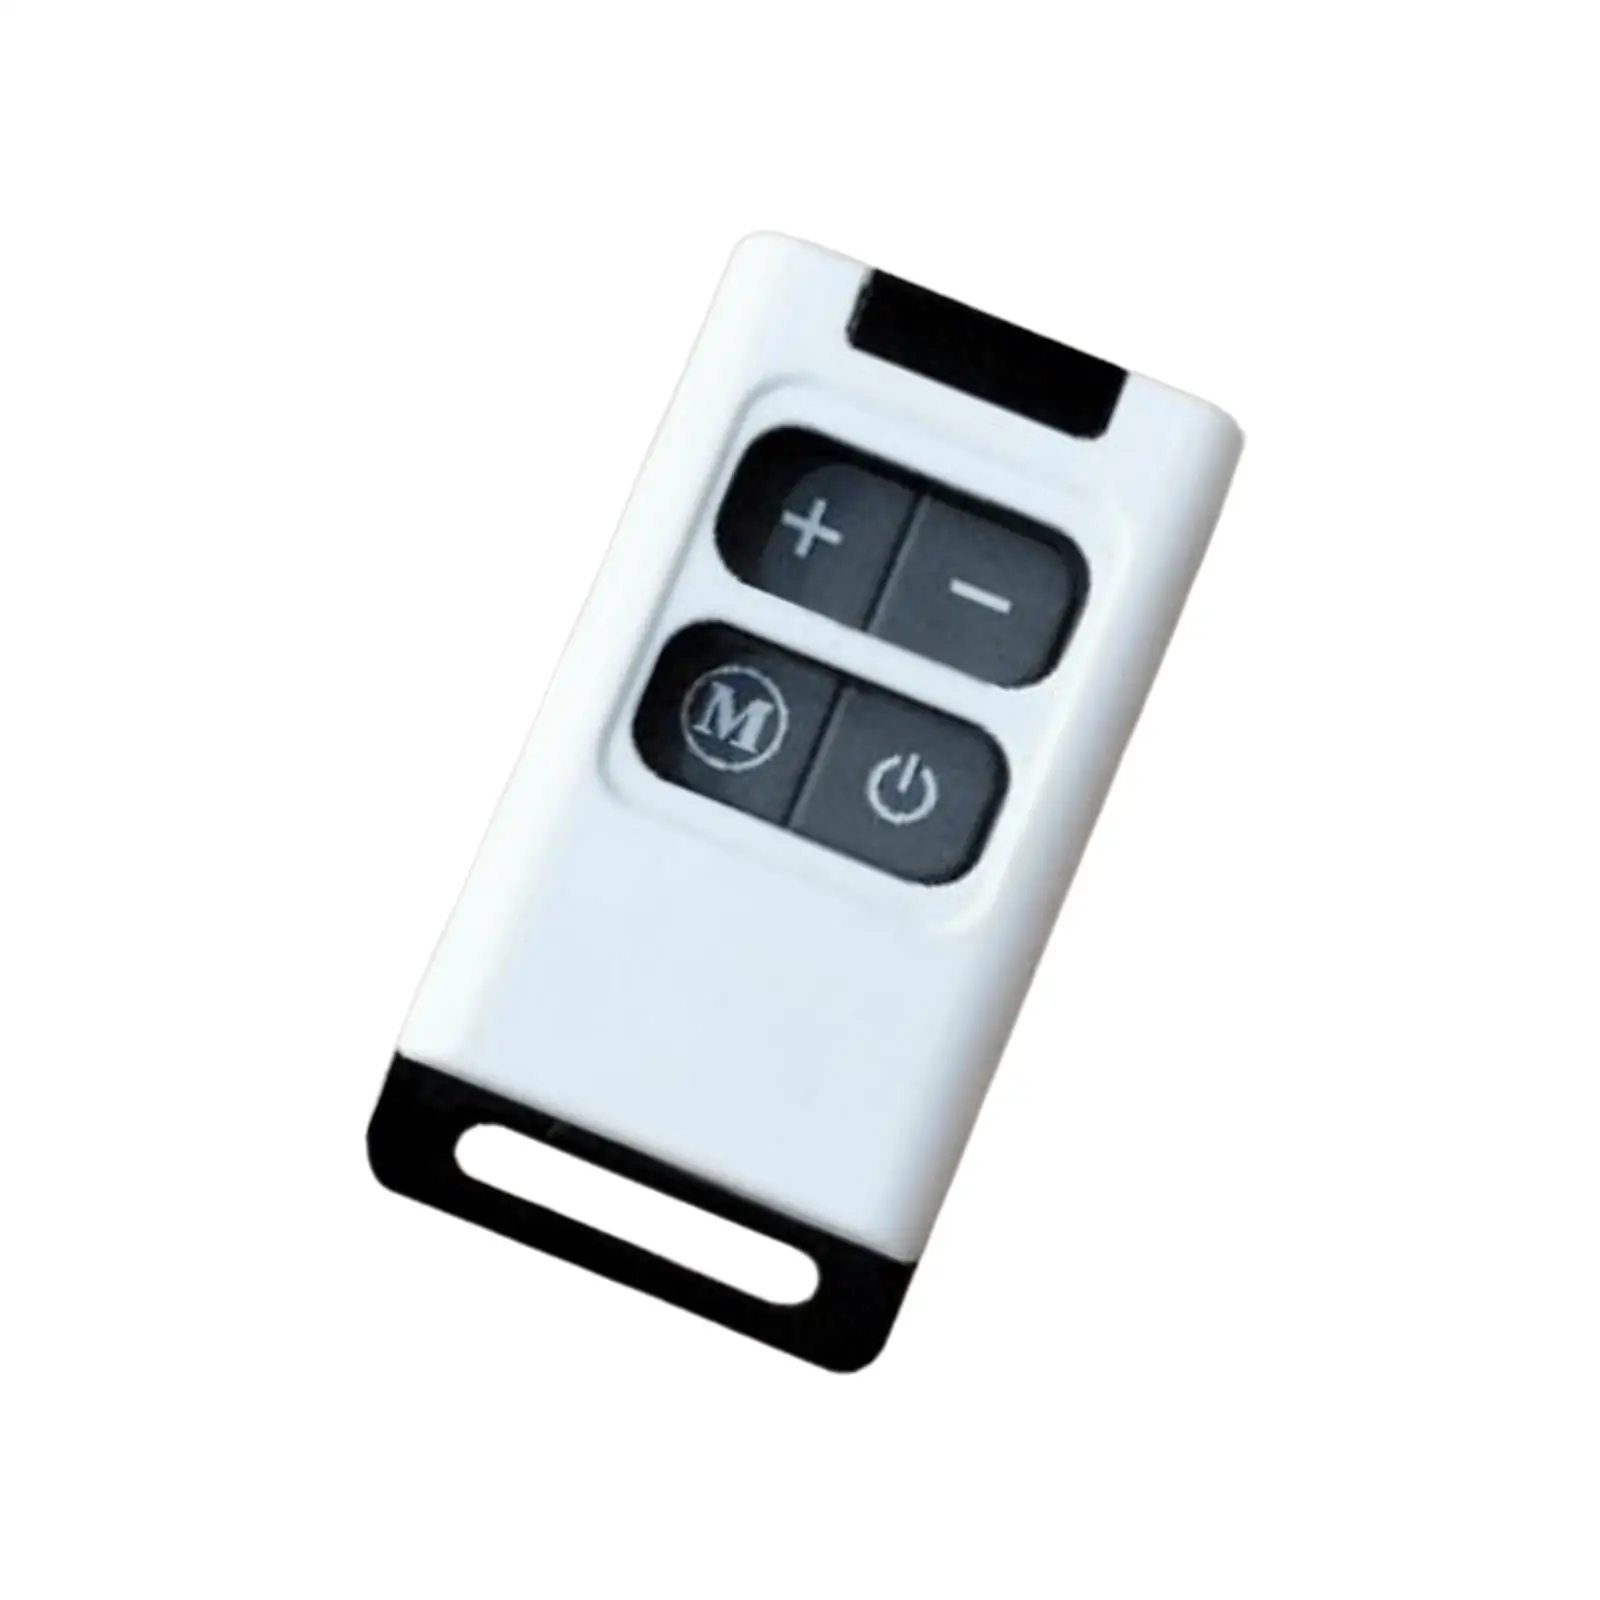 Car Parking Heater Remote Control ,Car Truck Air Parking Heater Switch